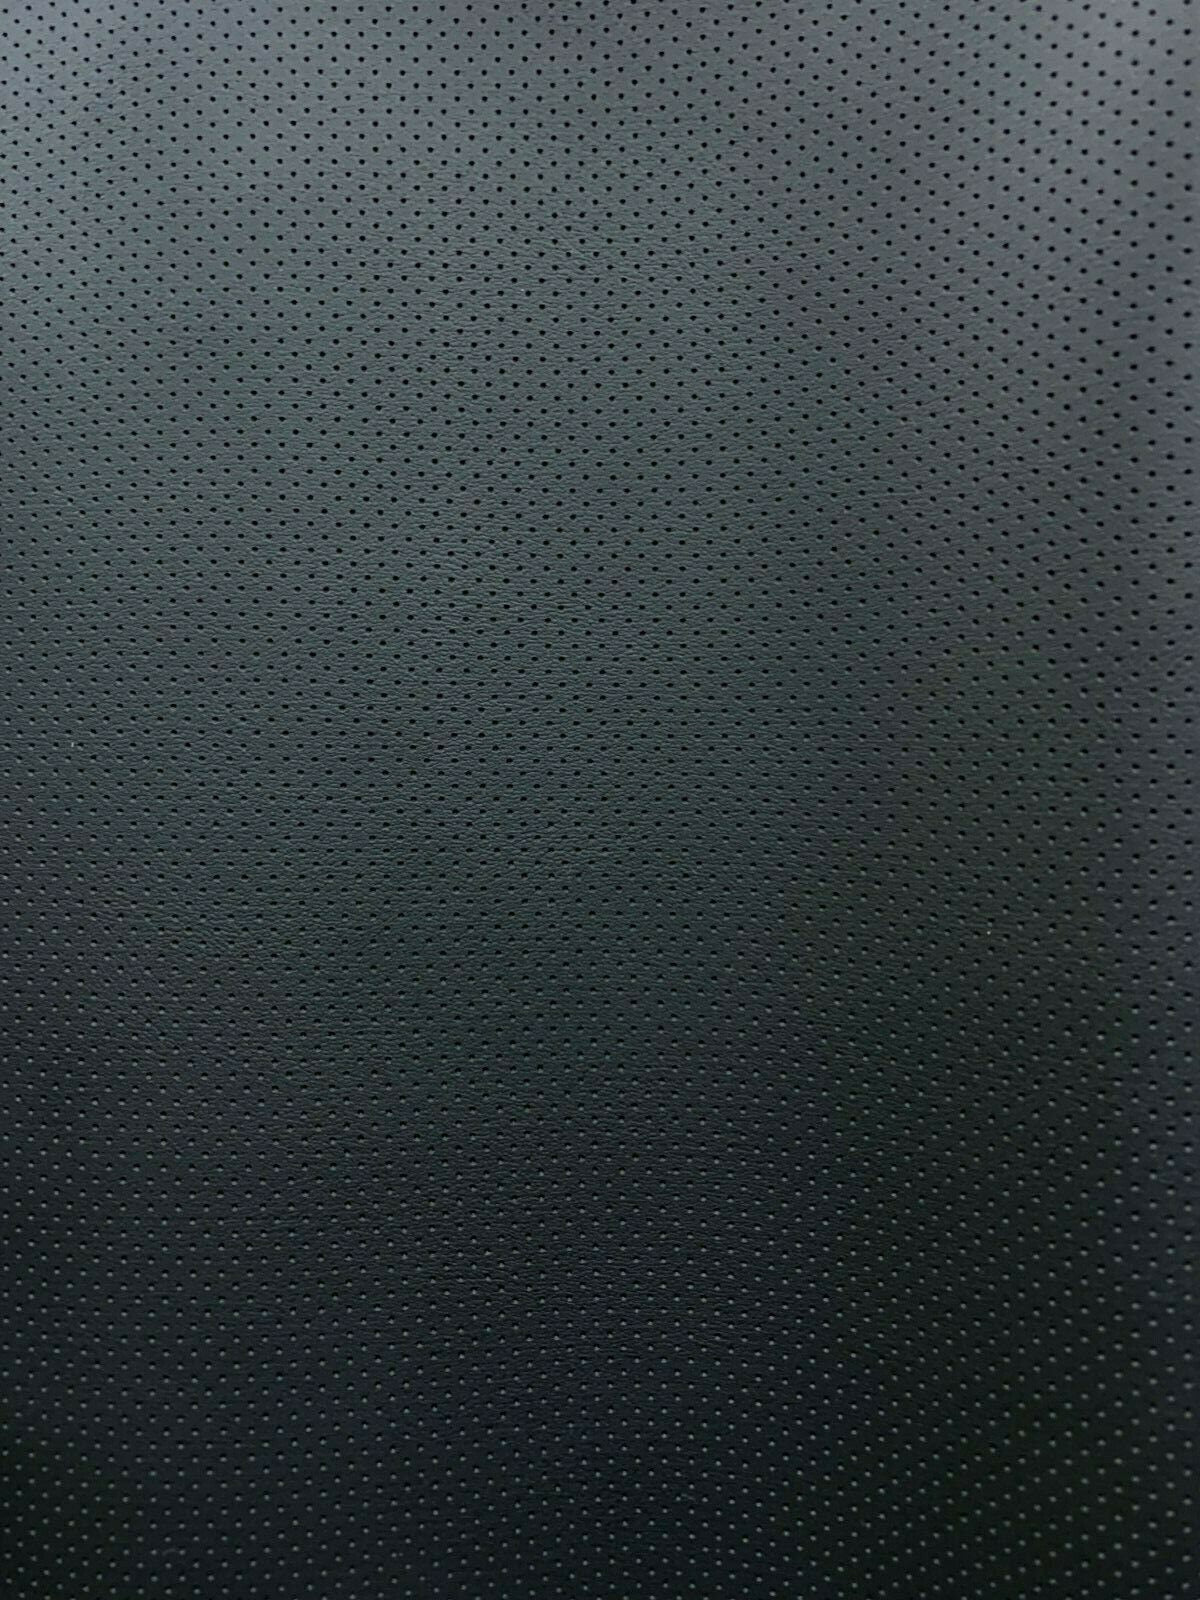 BLACK Perforated Faux Leather Vinyl Upholstery Fabric (55 in.) Sold By The Yard